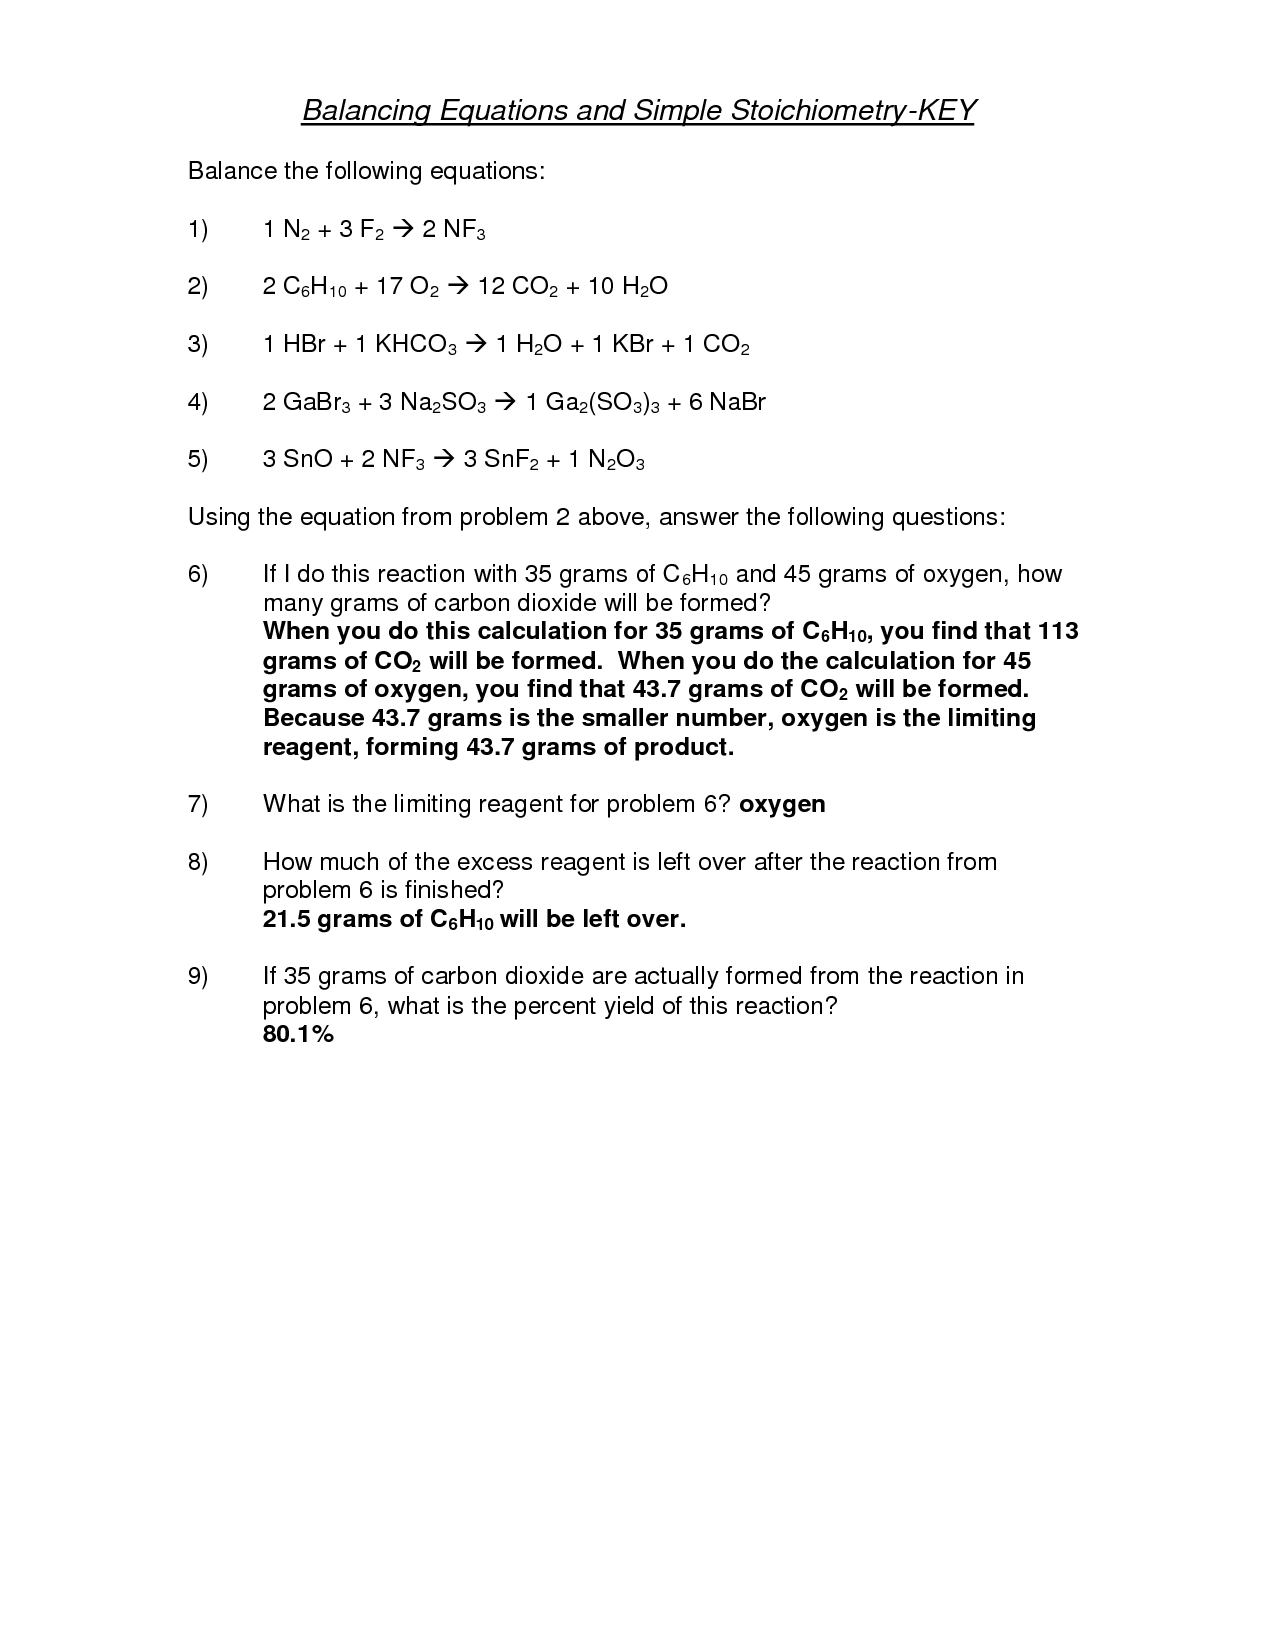 stoichiometry assignment 2 answer key